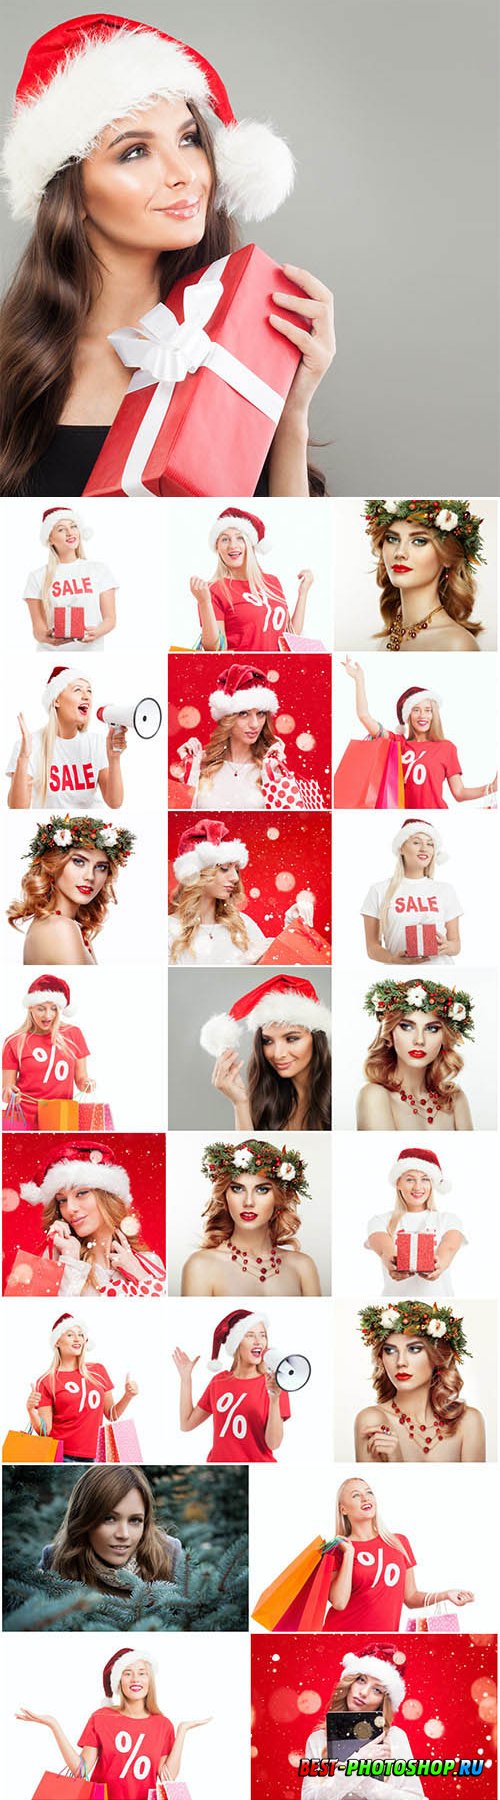 New Year and Christmas stock photos 74